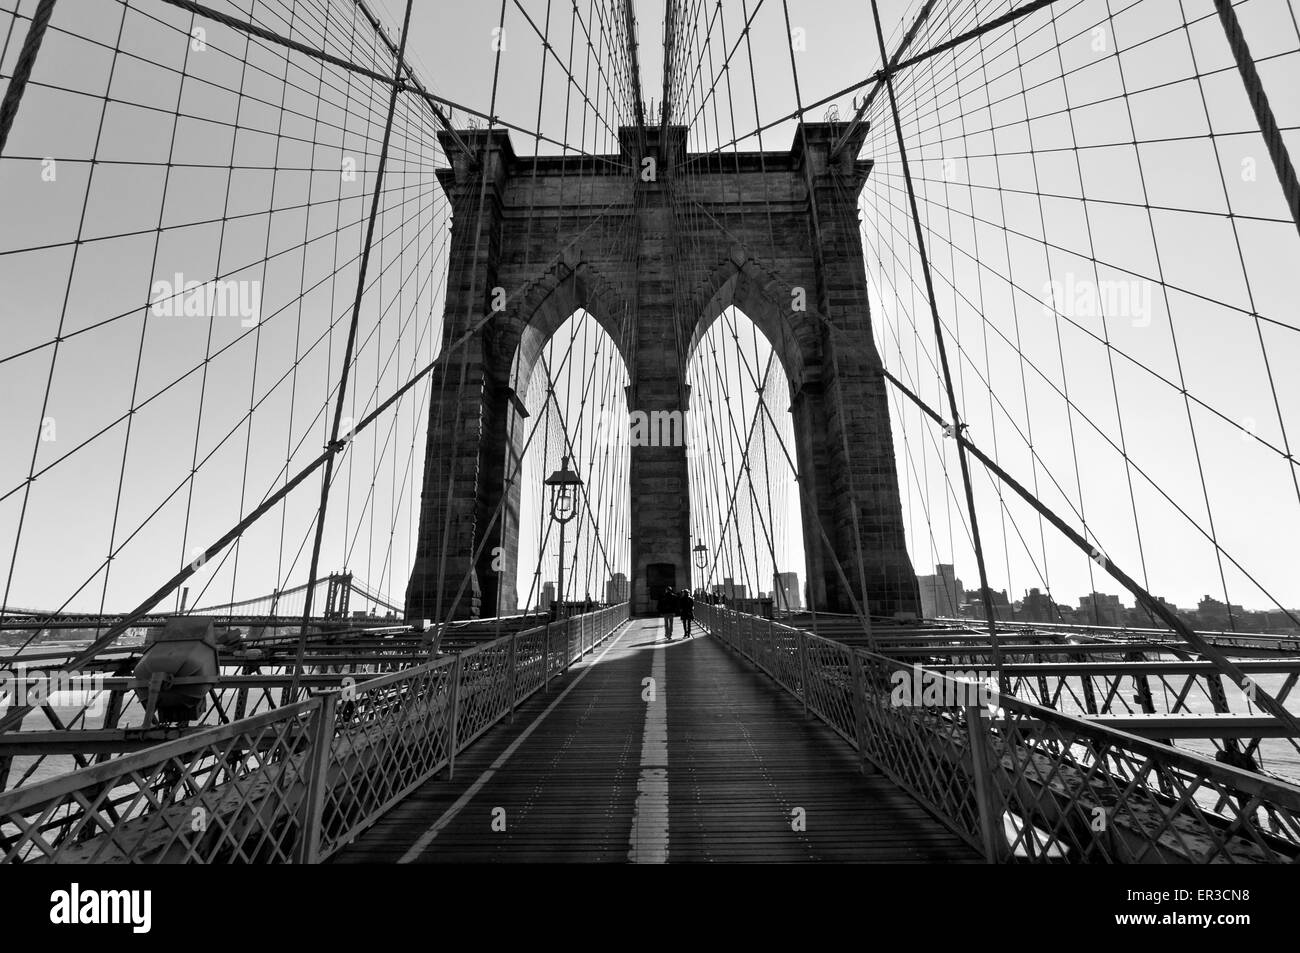 Silhouette of unknown people walking across the Brooklyn Bridge as the sun rises over the arches to the east - Black and White. Stock Photo